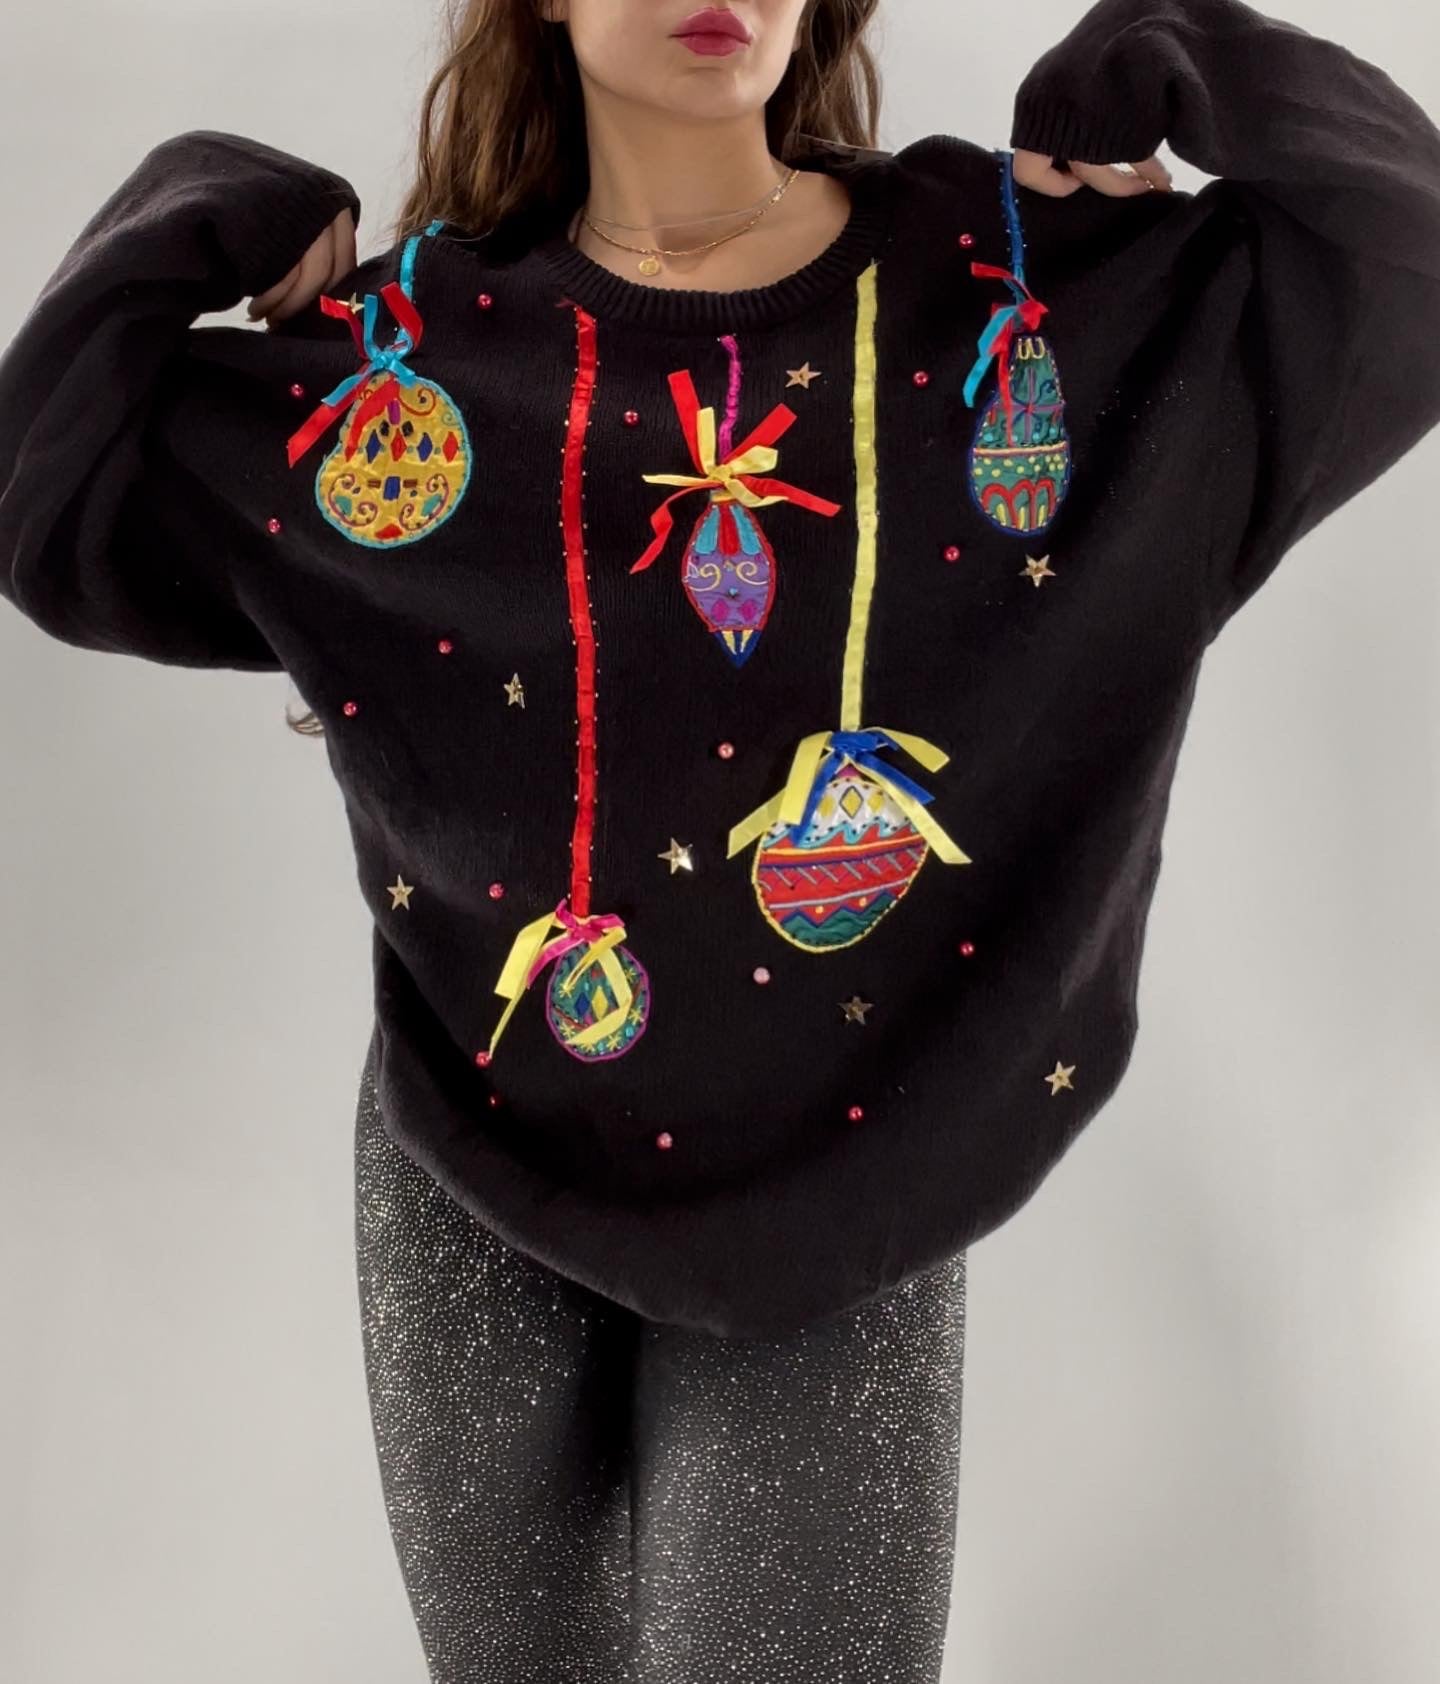 Urban Outfitters Ornament Embellished Sweater (Large)